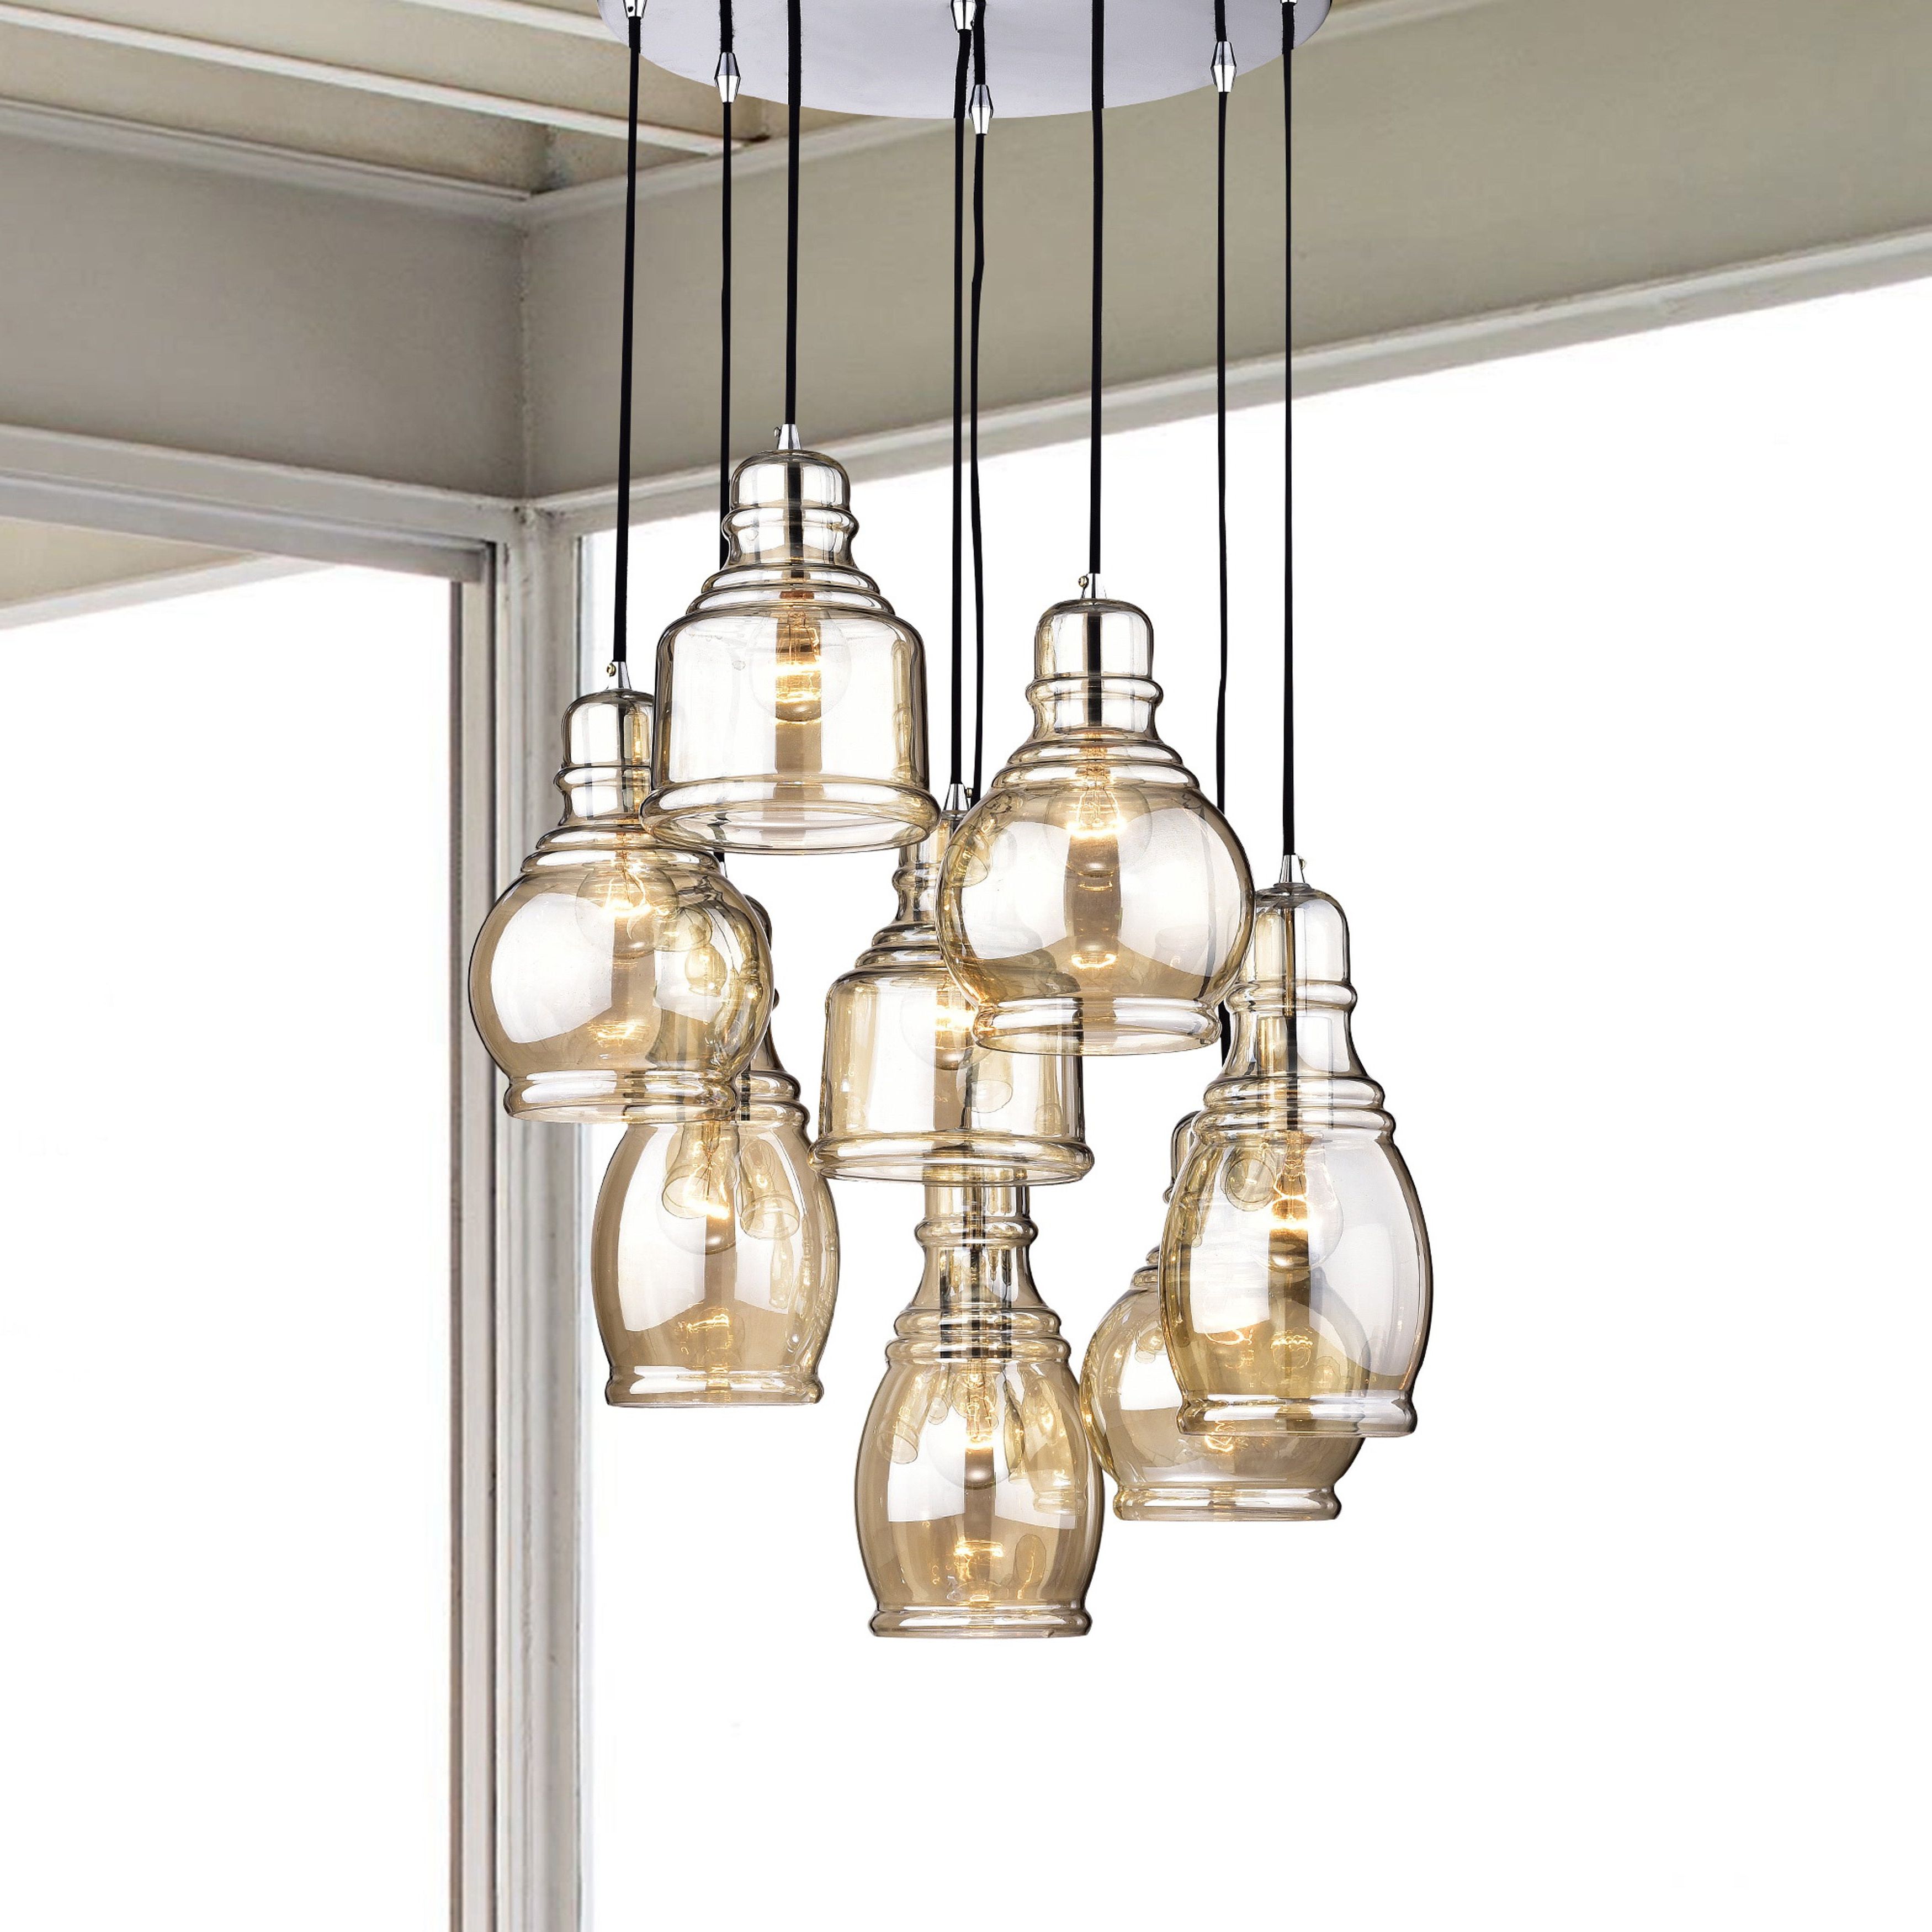 Most Current Mariana 8 Light Cognac Glass Cluster Pendant Chandelier With Chrome Finish  And Round Base Pertaining To Pruett Cognac Glass 8 Light Cluster Pendants (View 5 of 25)